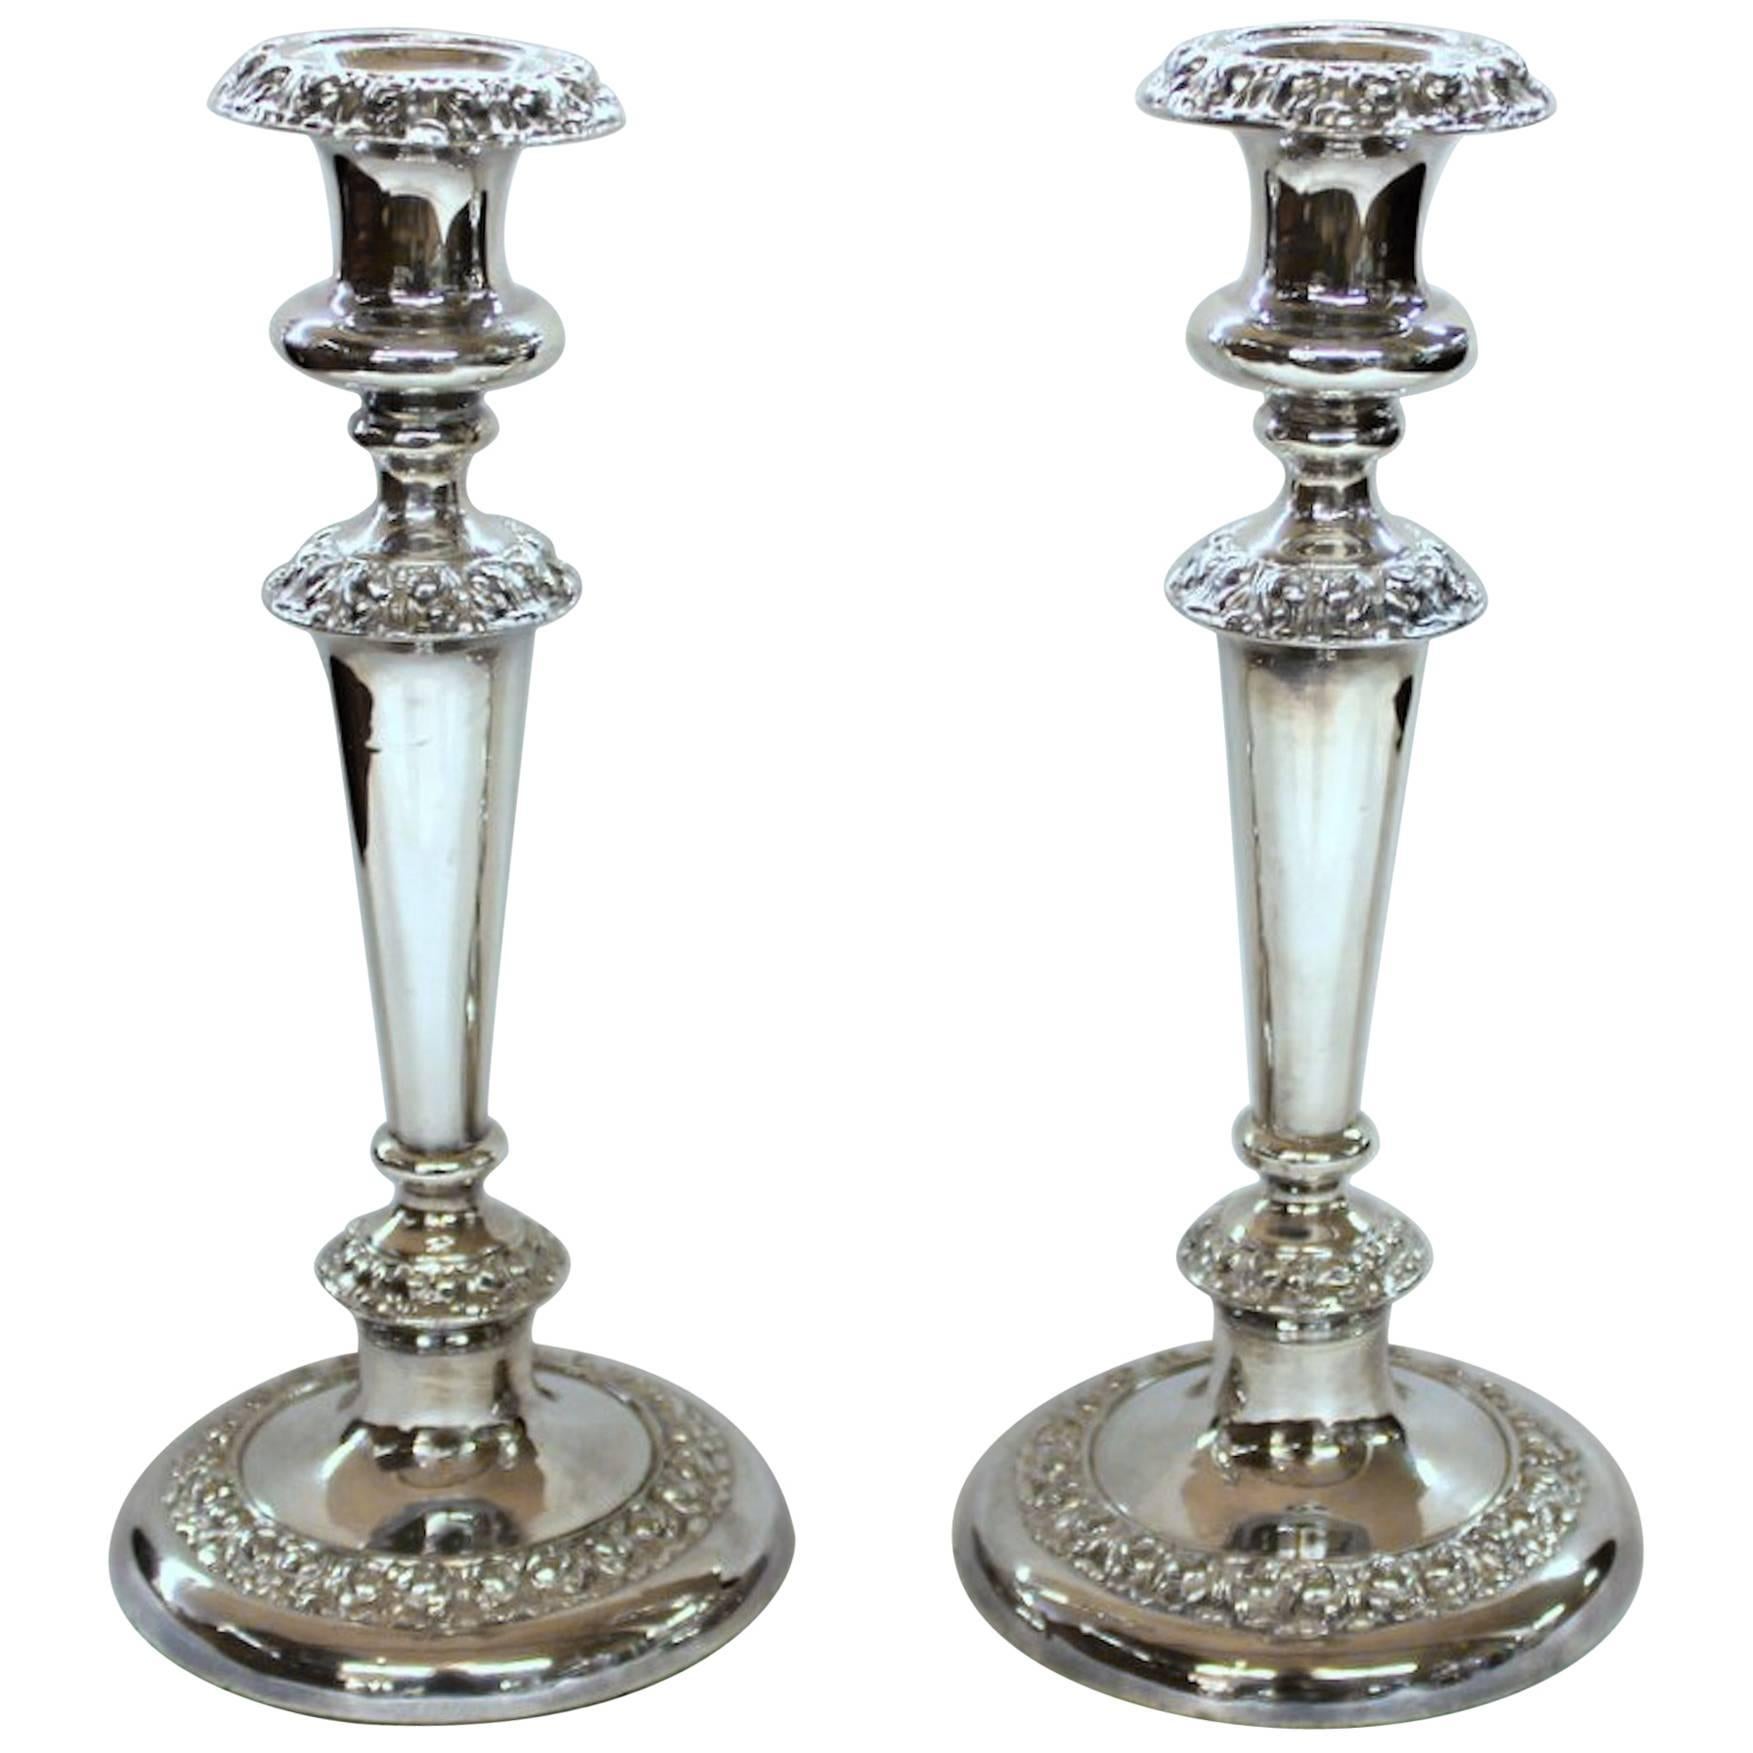 Pair of Antique English George IV Sheffield Plate Rococo Round Base Candlesticks